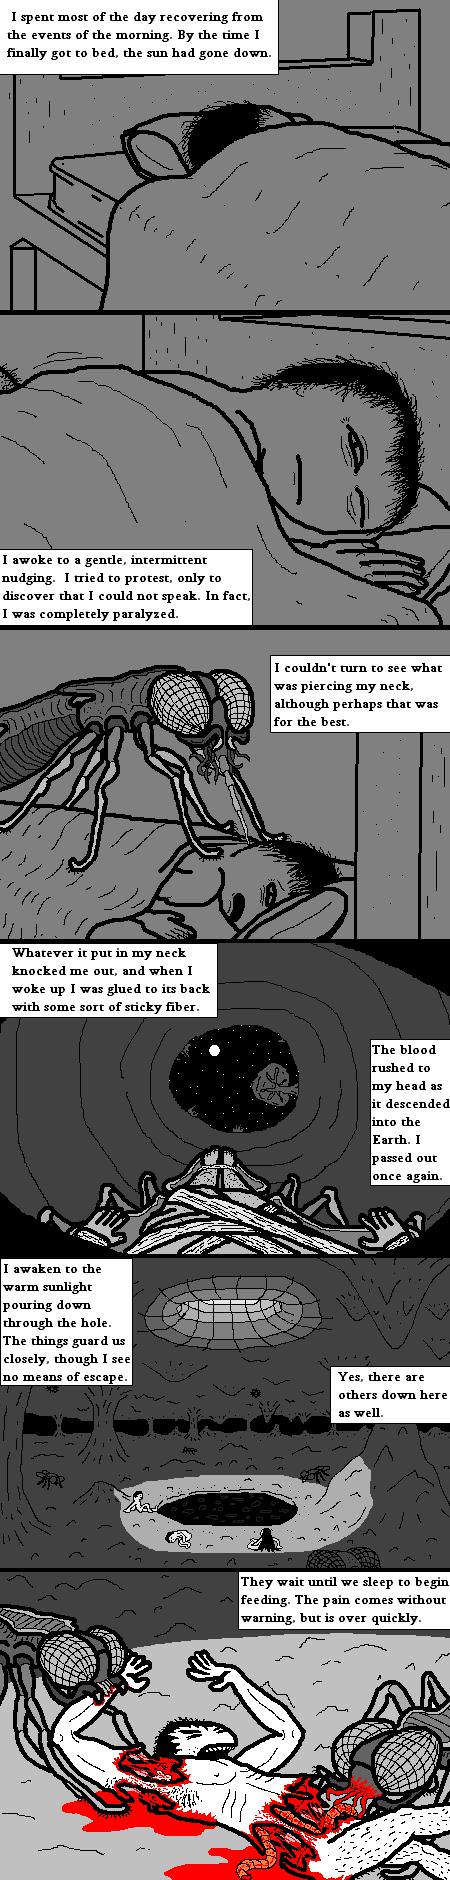 Enjoy A Creepy Comic That Will Mess With Your Mind To Celebrate Friday The 13th